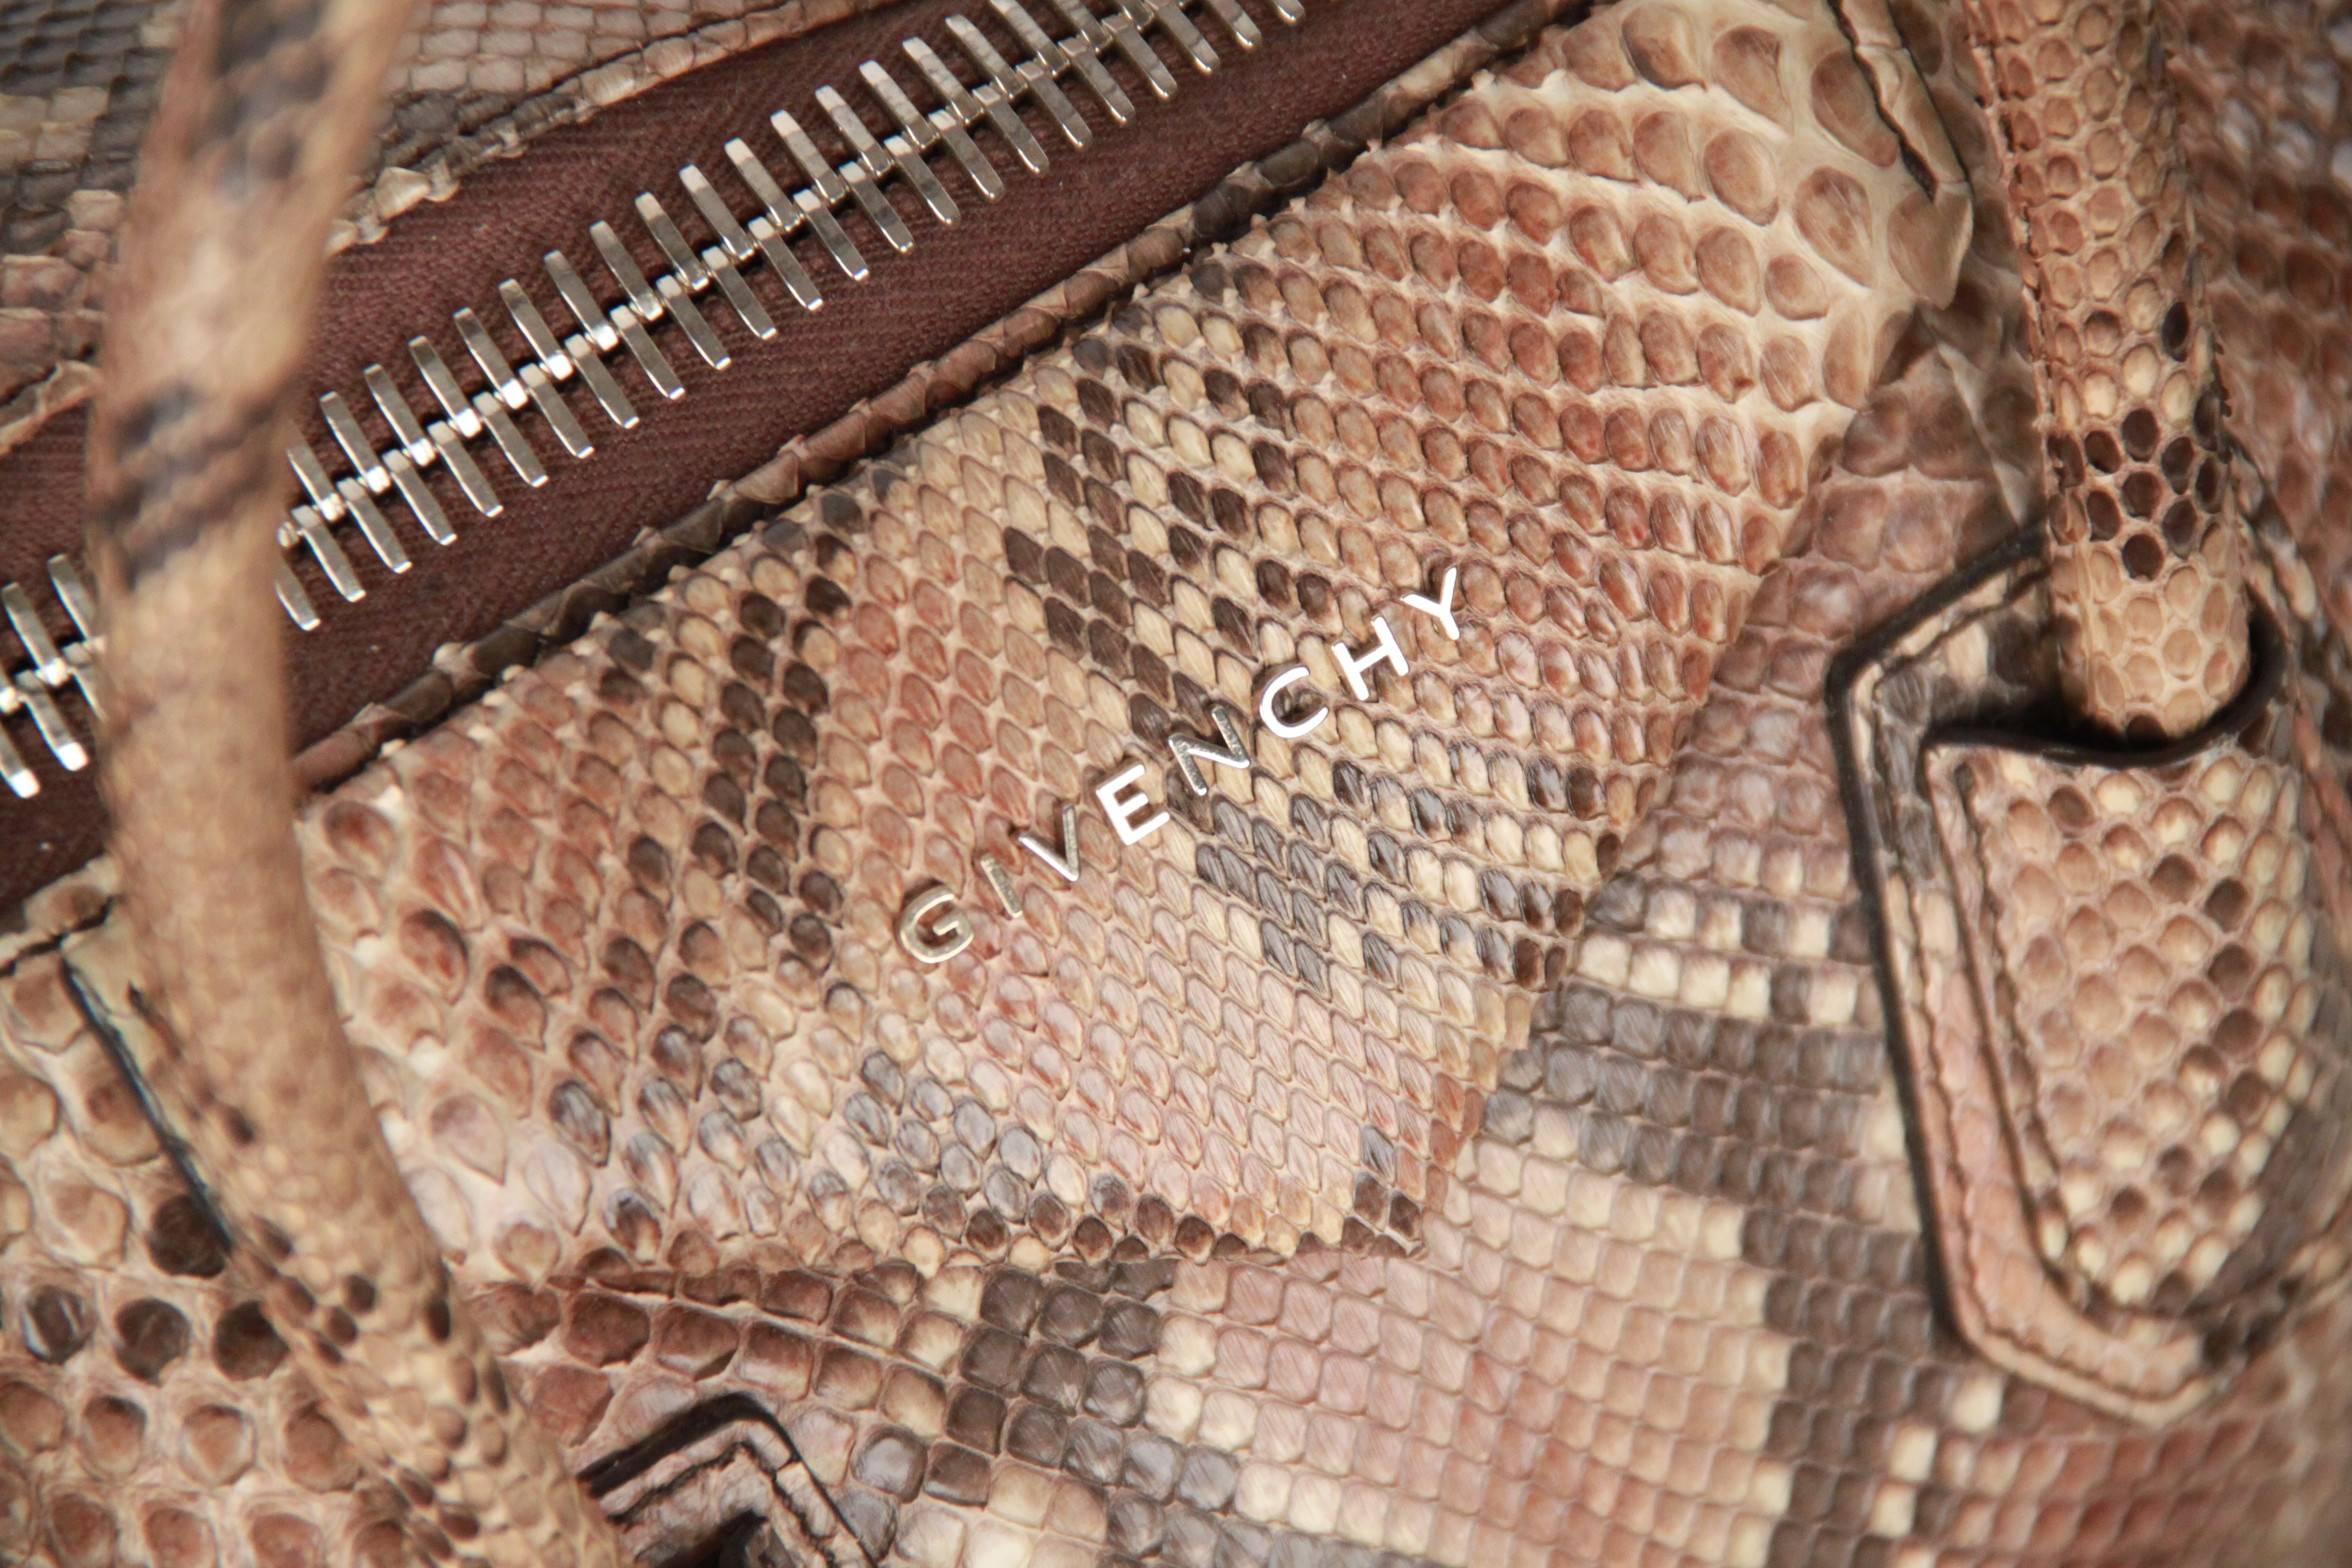 Stunning python GIVENCHY 'Antigona' bag - Medium - in beige python snakeskin. It features envelope flap detail with logo lettering, pale gold tone hardware, upper zipper closure, double python handles and structured base. Lined with black textile